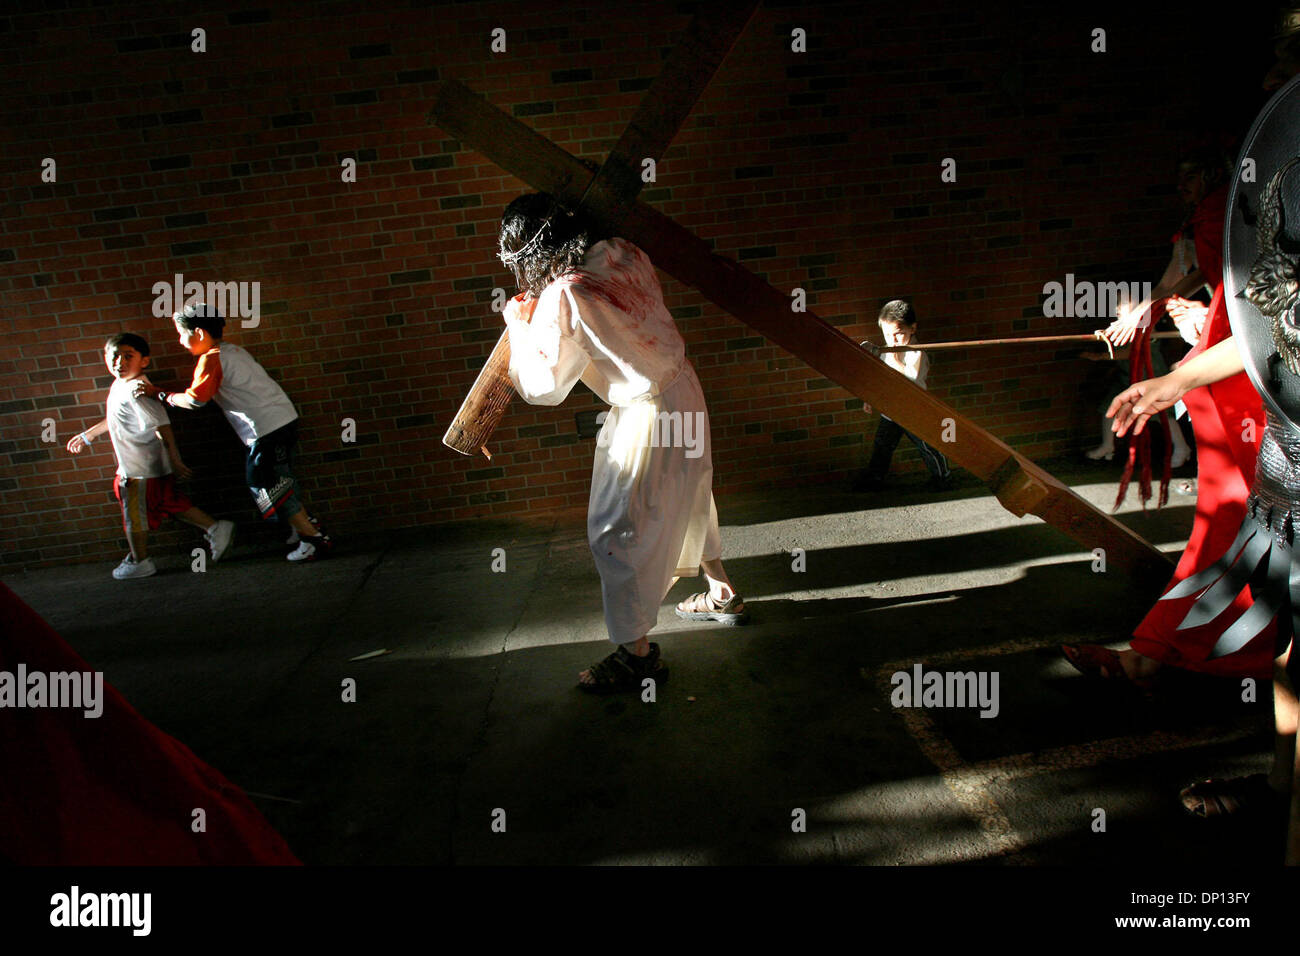 Apr 14, 2006; Minneapolis, MN, USA; Taking advantage of warm weather a student group known as Jovenes En Accion (Youth in Action) perform the Passioin of the Christ play outdoors at Incarnation Catholic Church on 38th and Pleasant Streets in Minneapolis. Mandatory Credit: Photo by Elizabeth Flores/ZUMA Press. (©) Copyright 2006 by Minneapolis Star T Stock Photo